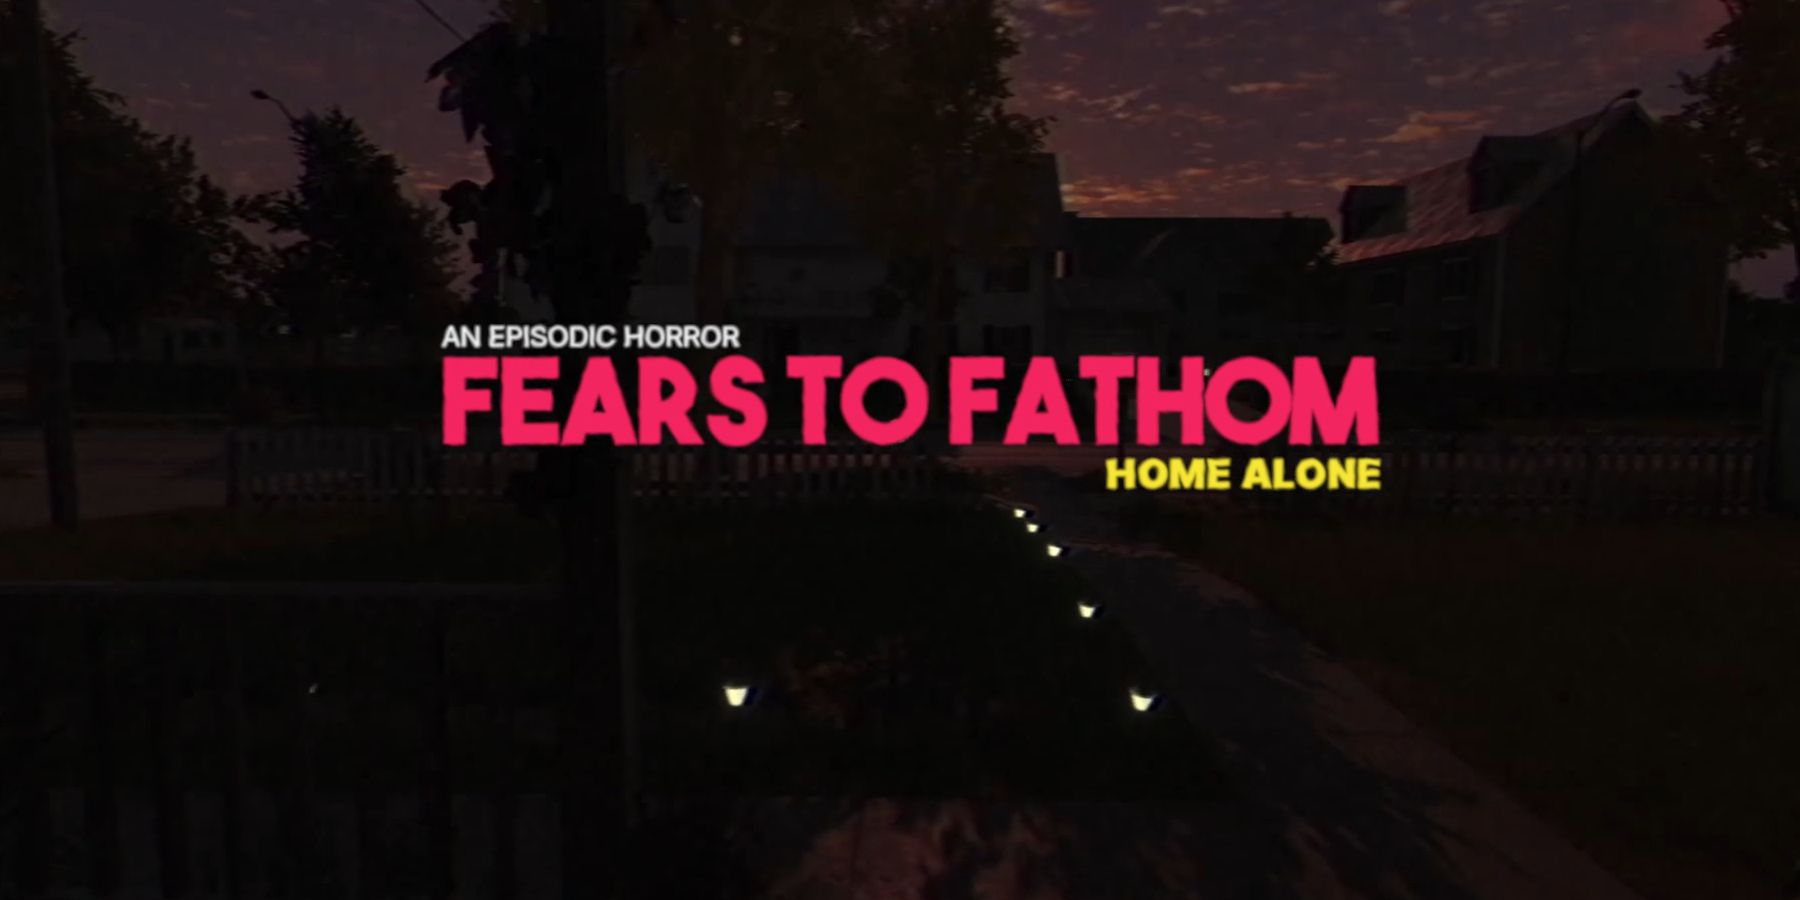 fears to fathom home alone title with a front porch as backdrop